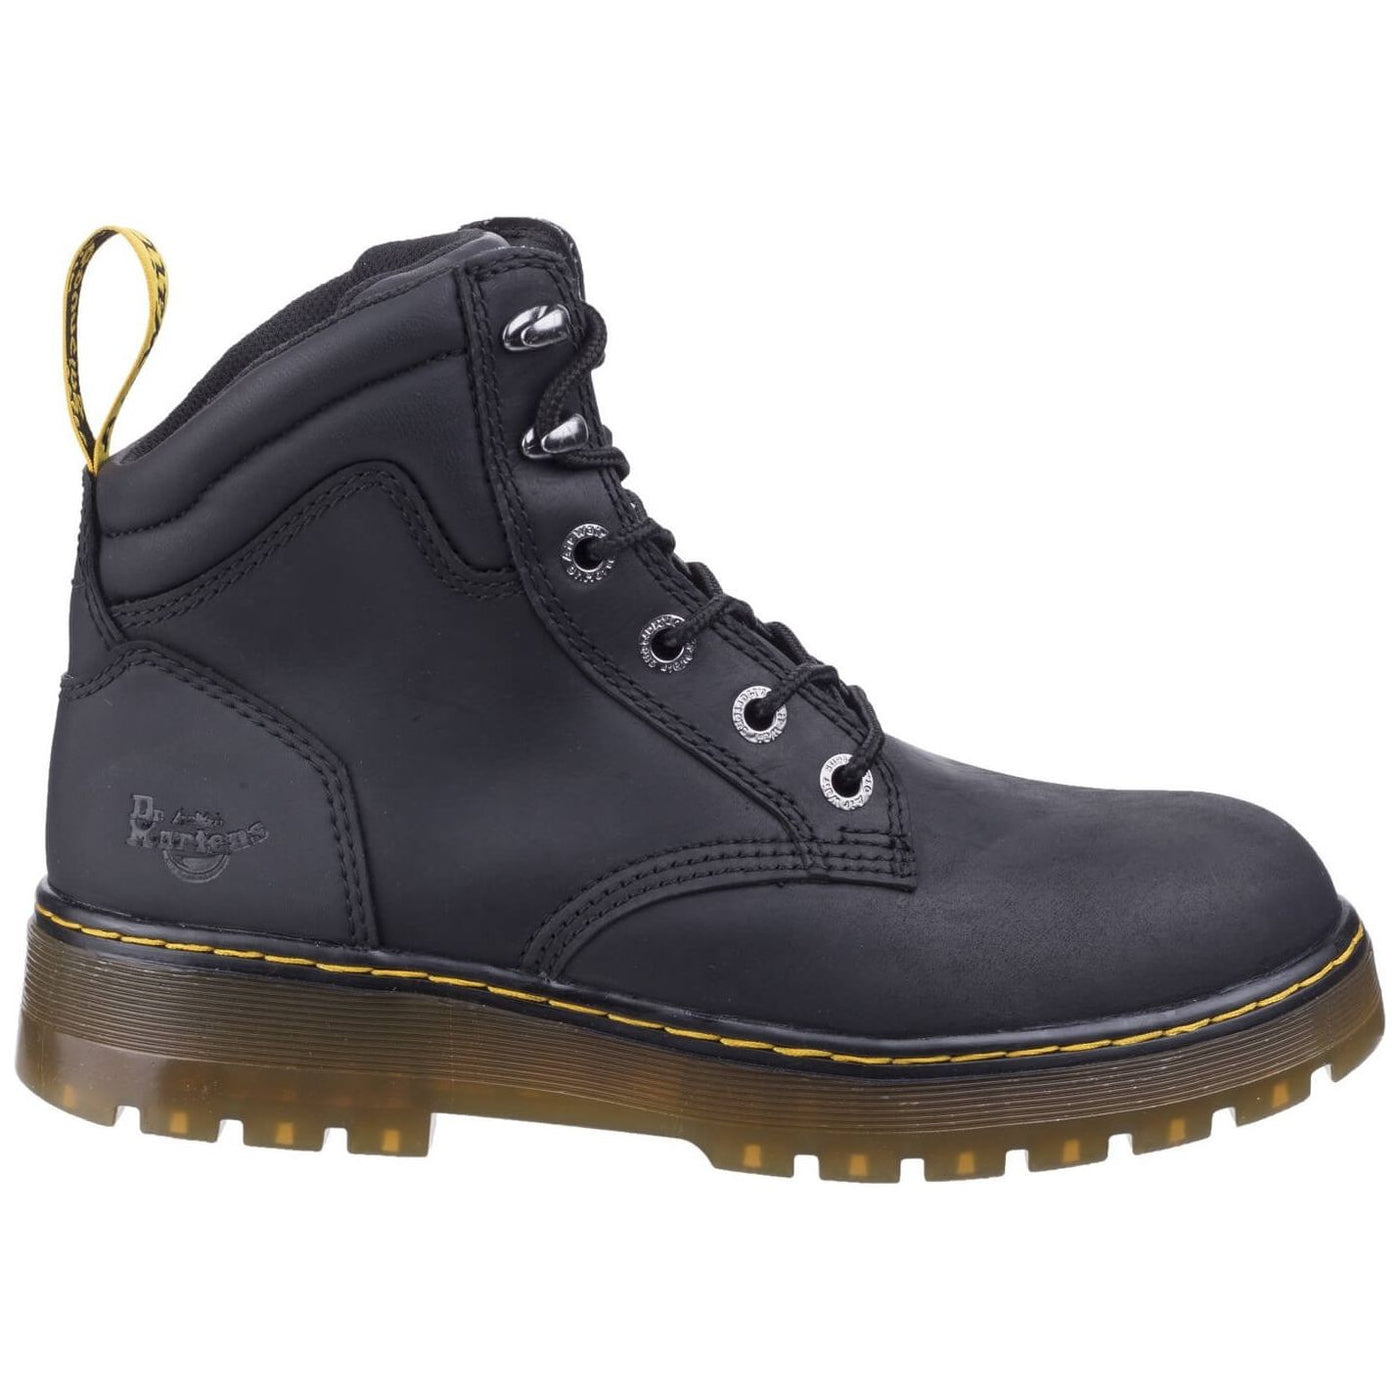 Dr Martens Brace Hiking Style Safety Boots-Black Republic-4